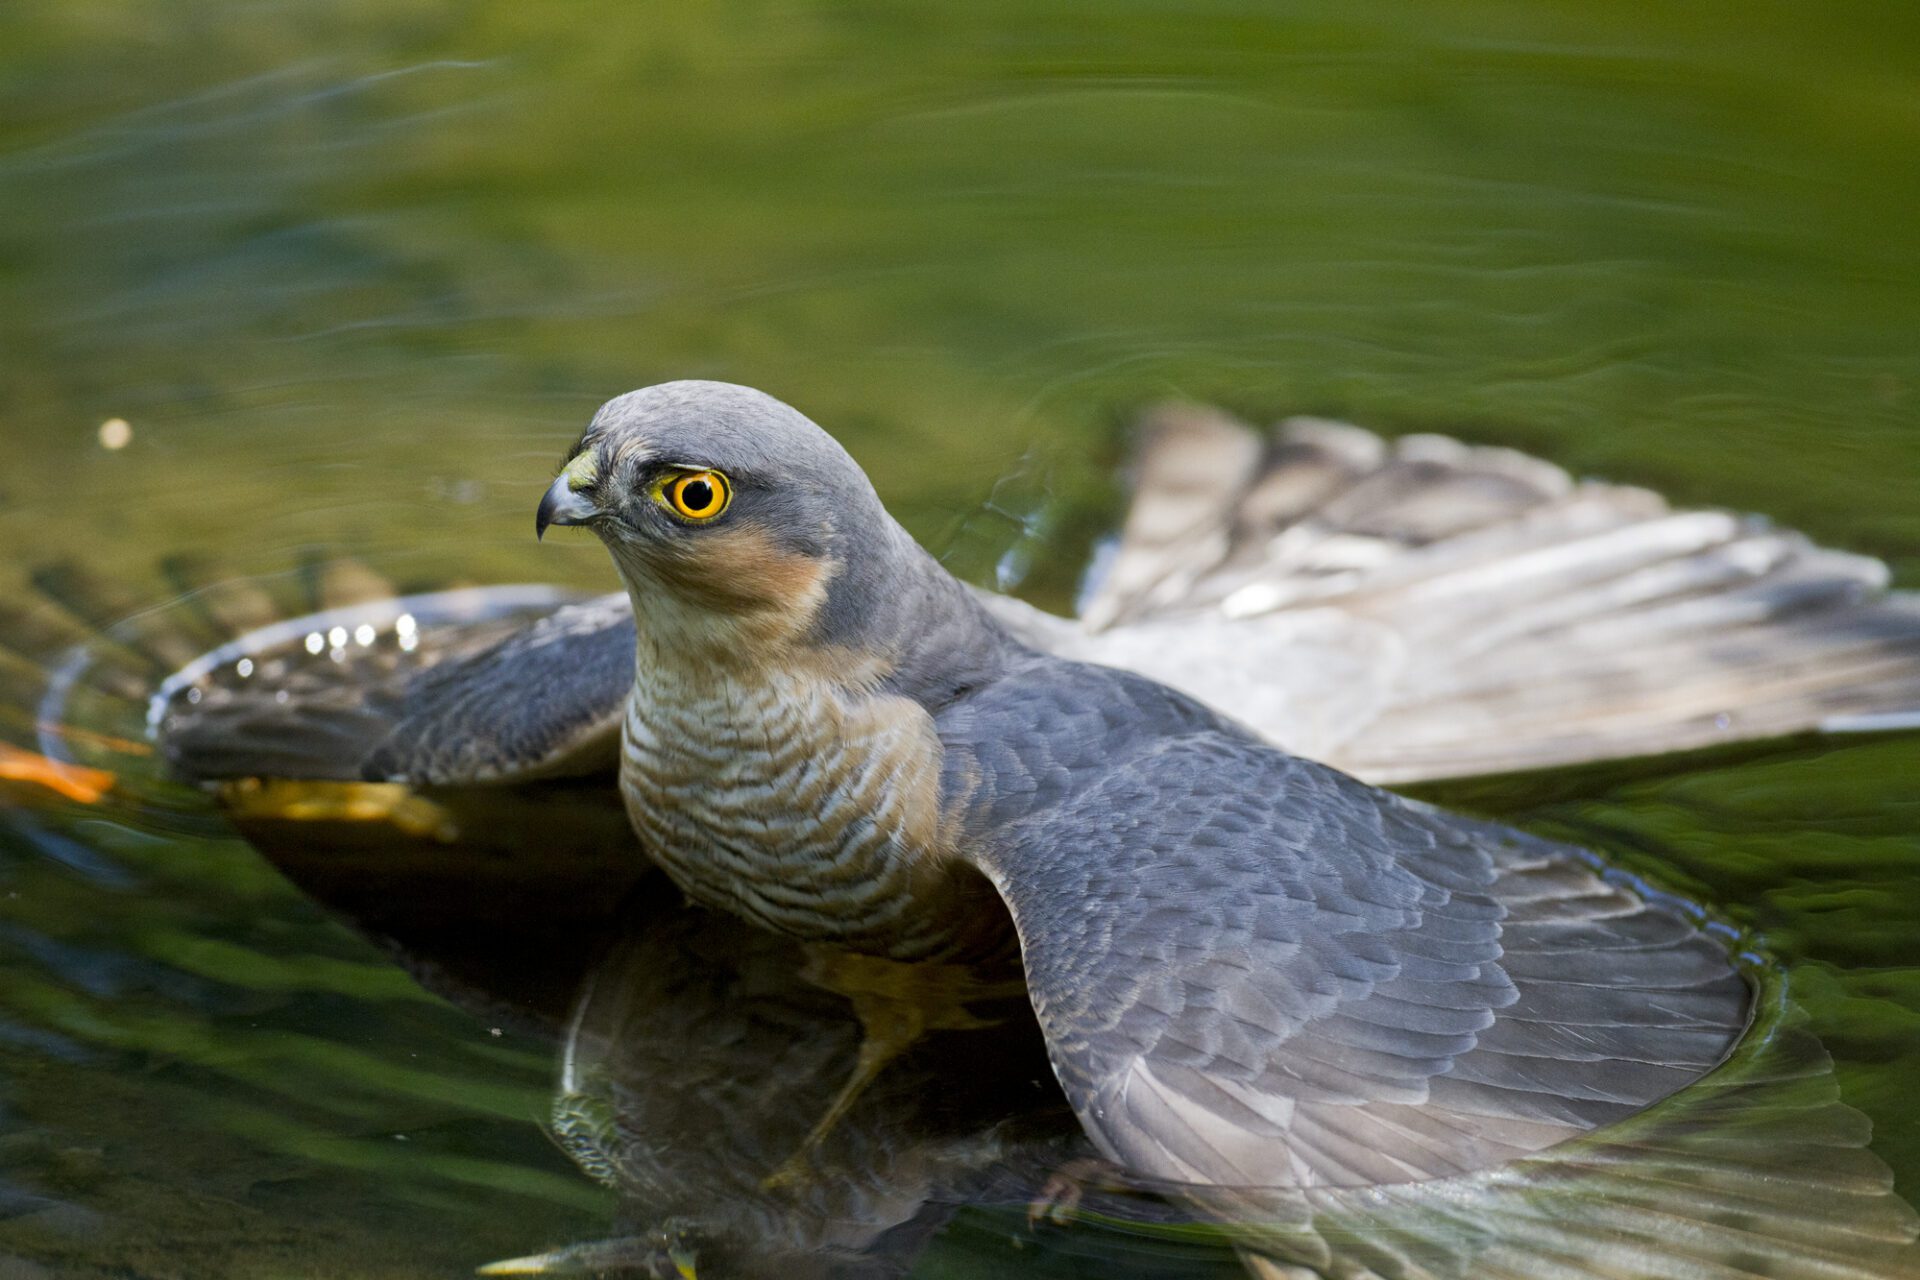 Male-Sparrowhawk-hiding-its-kill-under-water-(photo-by-Shay-Connolly)